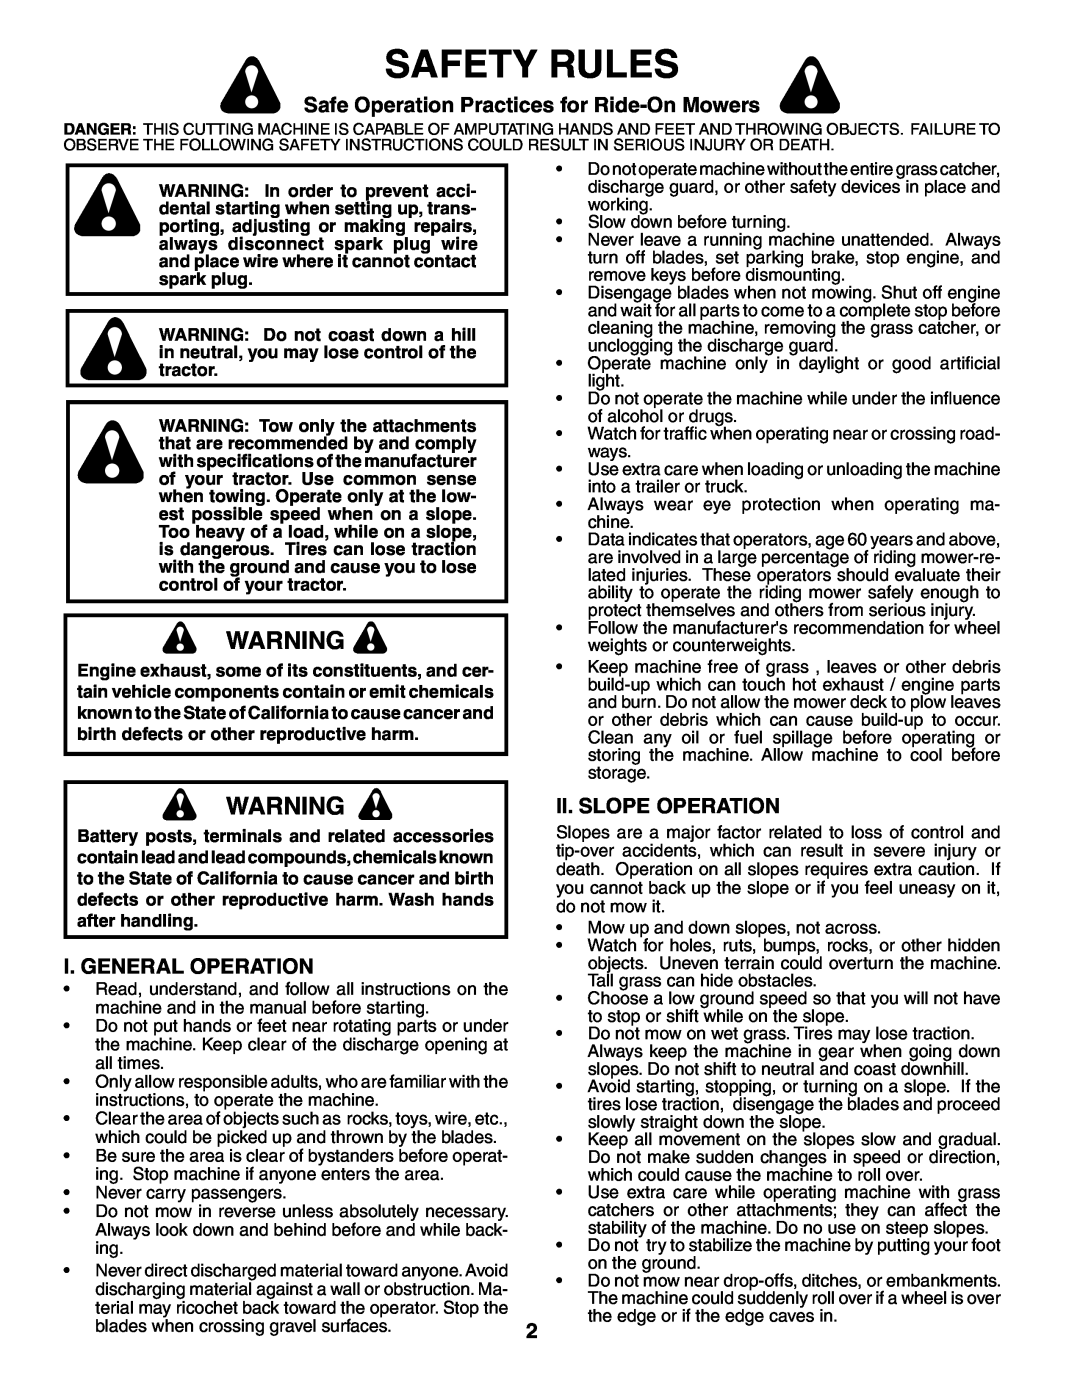 Murray MB12538LT manual Safety Rules, Safe Operation Practices for Ride-OnMowers, I. General Operation, Ii. Slope Operation 